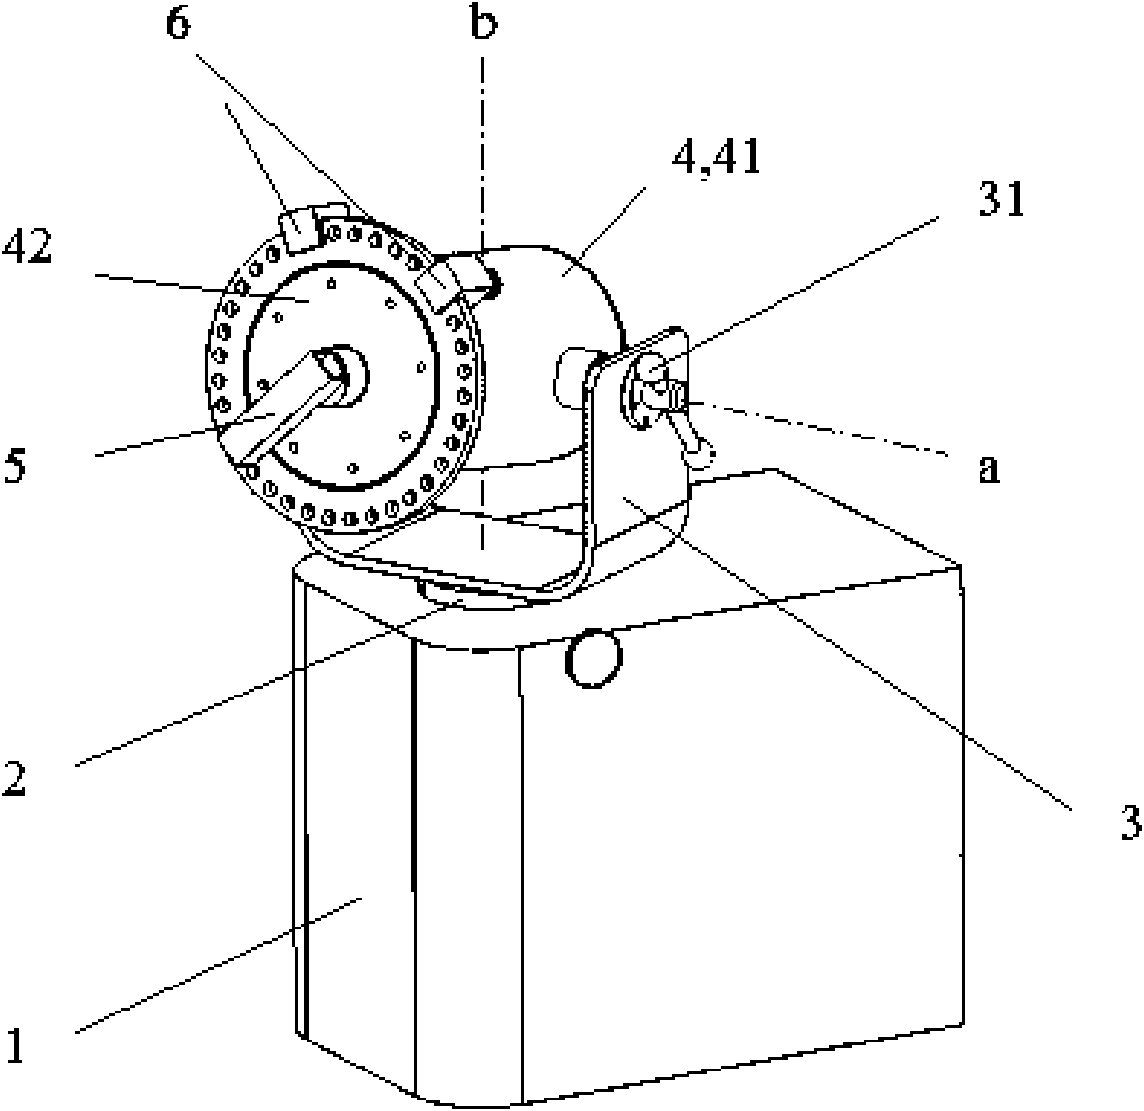 Myodynamia training and assessment device and method thereof